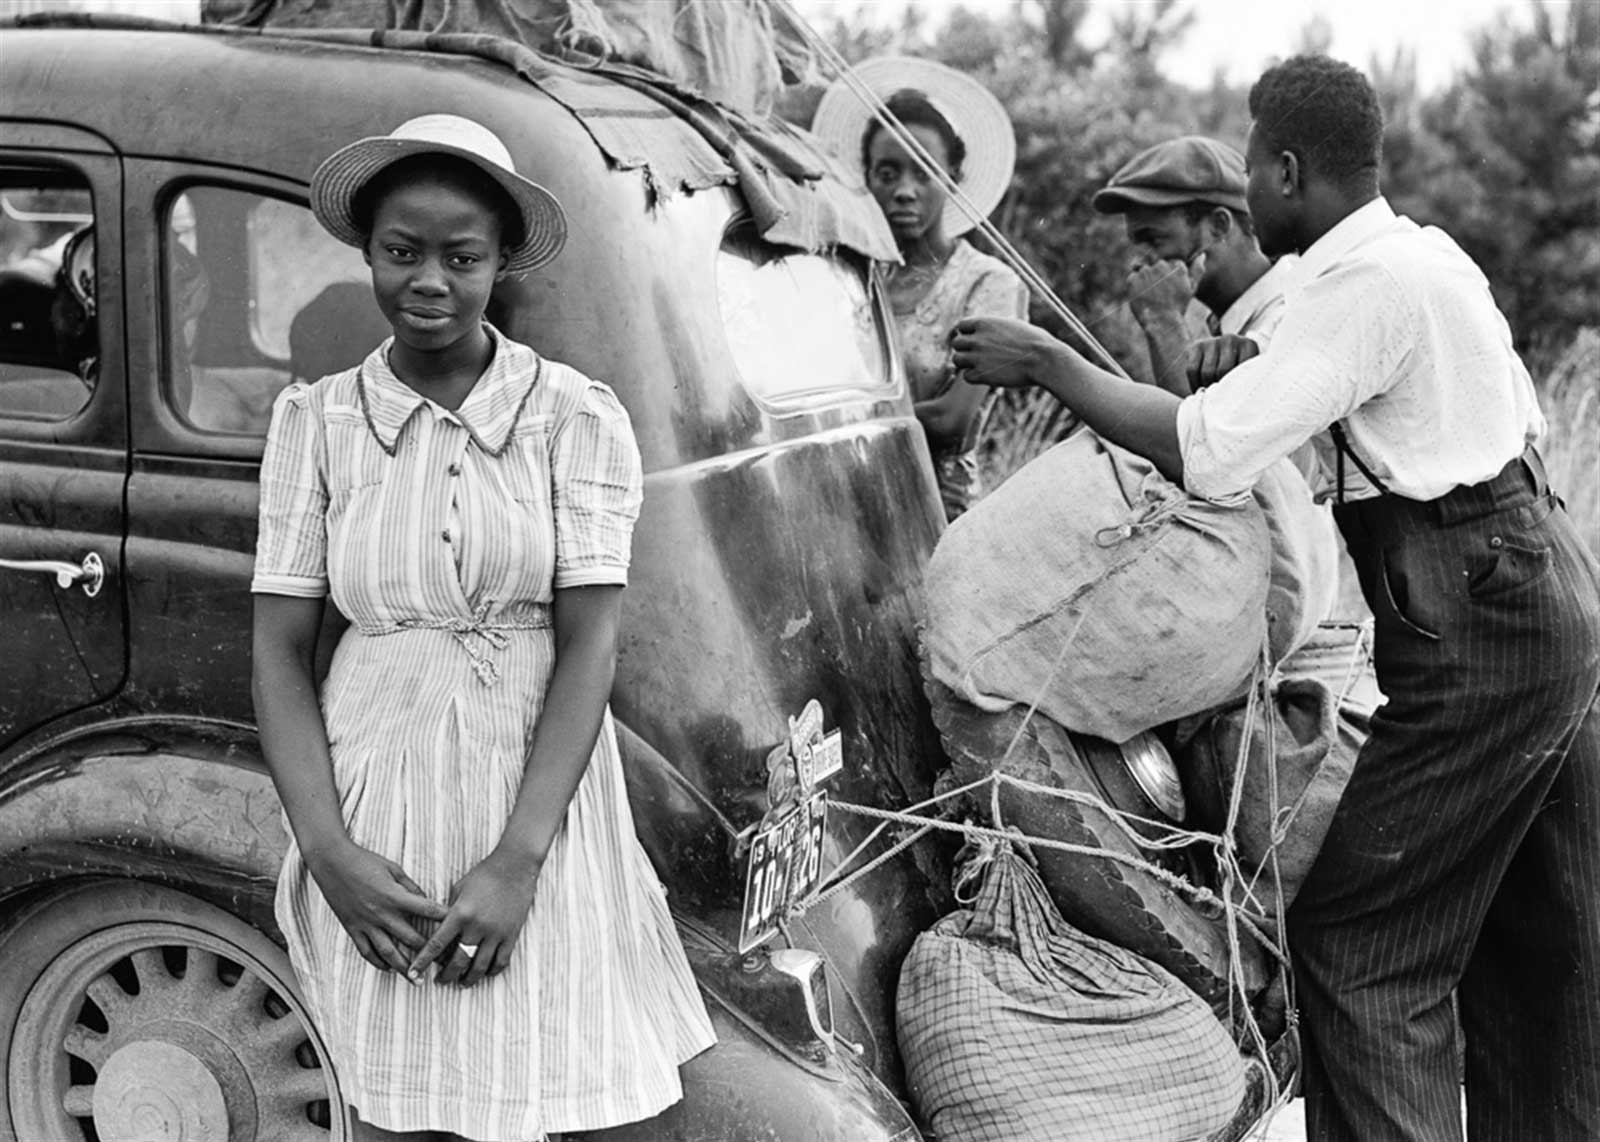 Vintage black and white photography of people loading stuff into a car with a woman looking into the camera